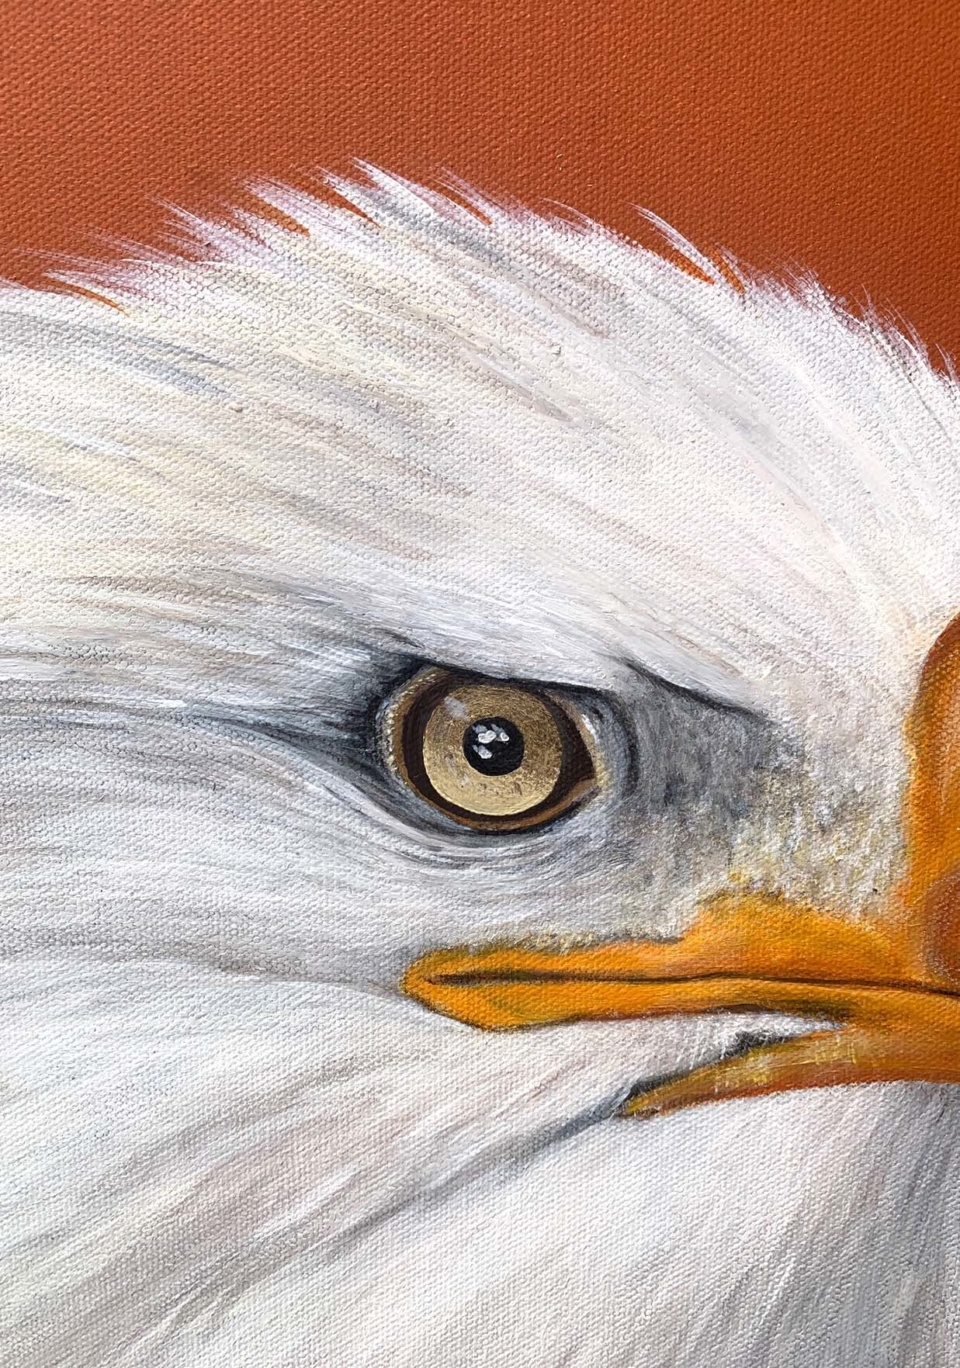 Eveleen Hally Eagle In Suit Artwork Detail